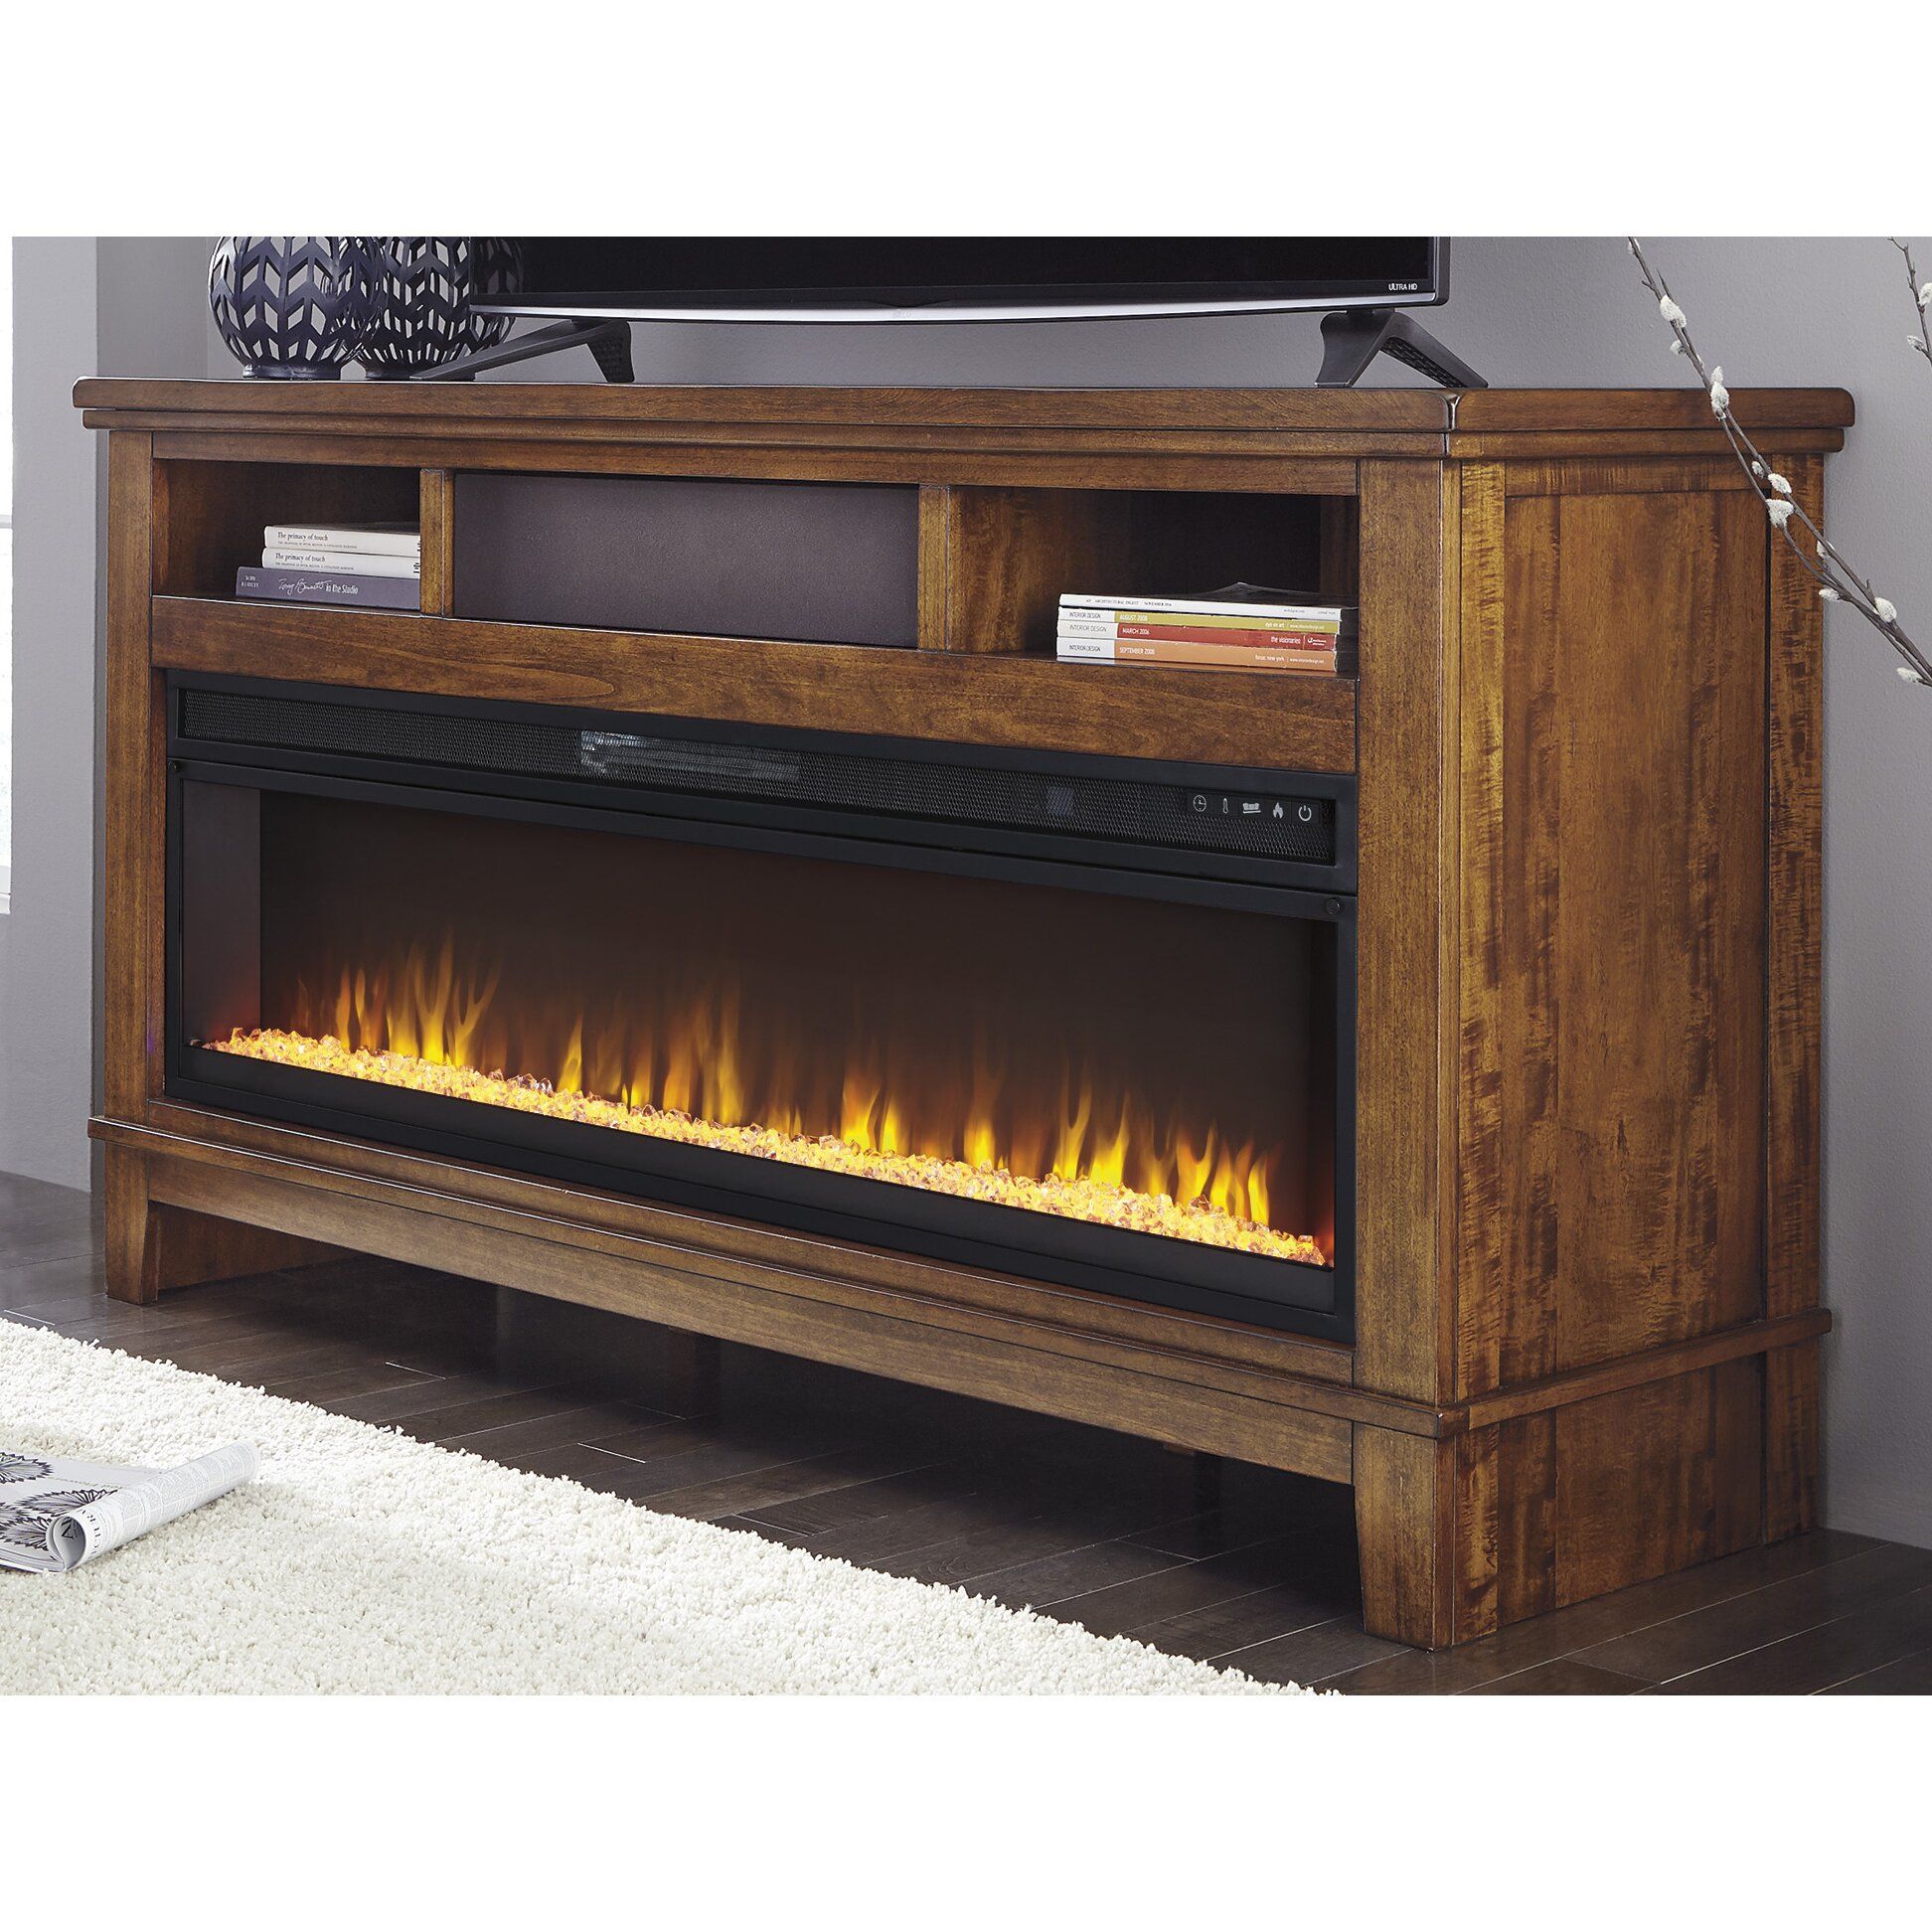 Brayden Studio Hylan Tv Stand With Electric Fireplace & Reviews | Wayfair Intended For Tv Stands With Electric Fireplace (View 18 of 20)